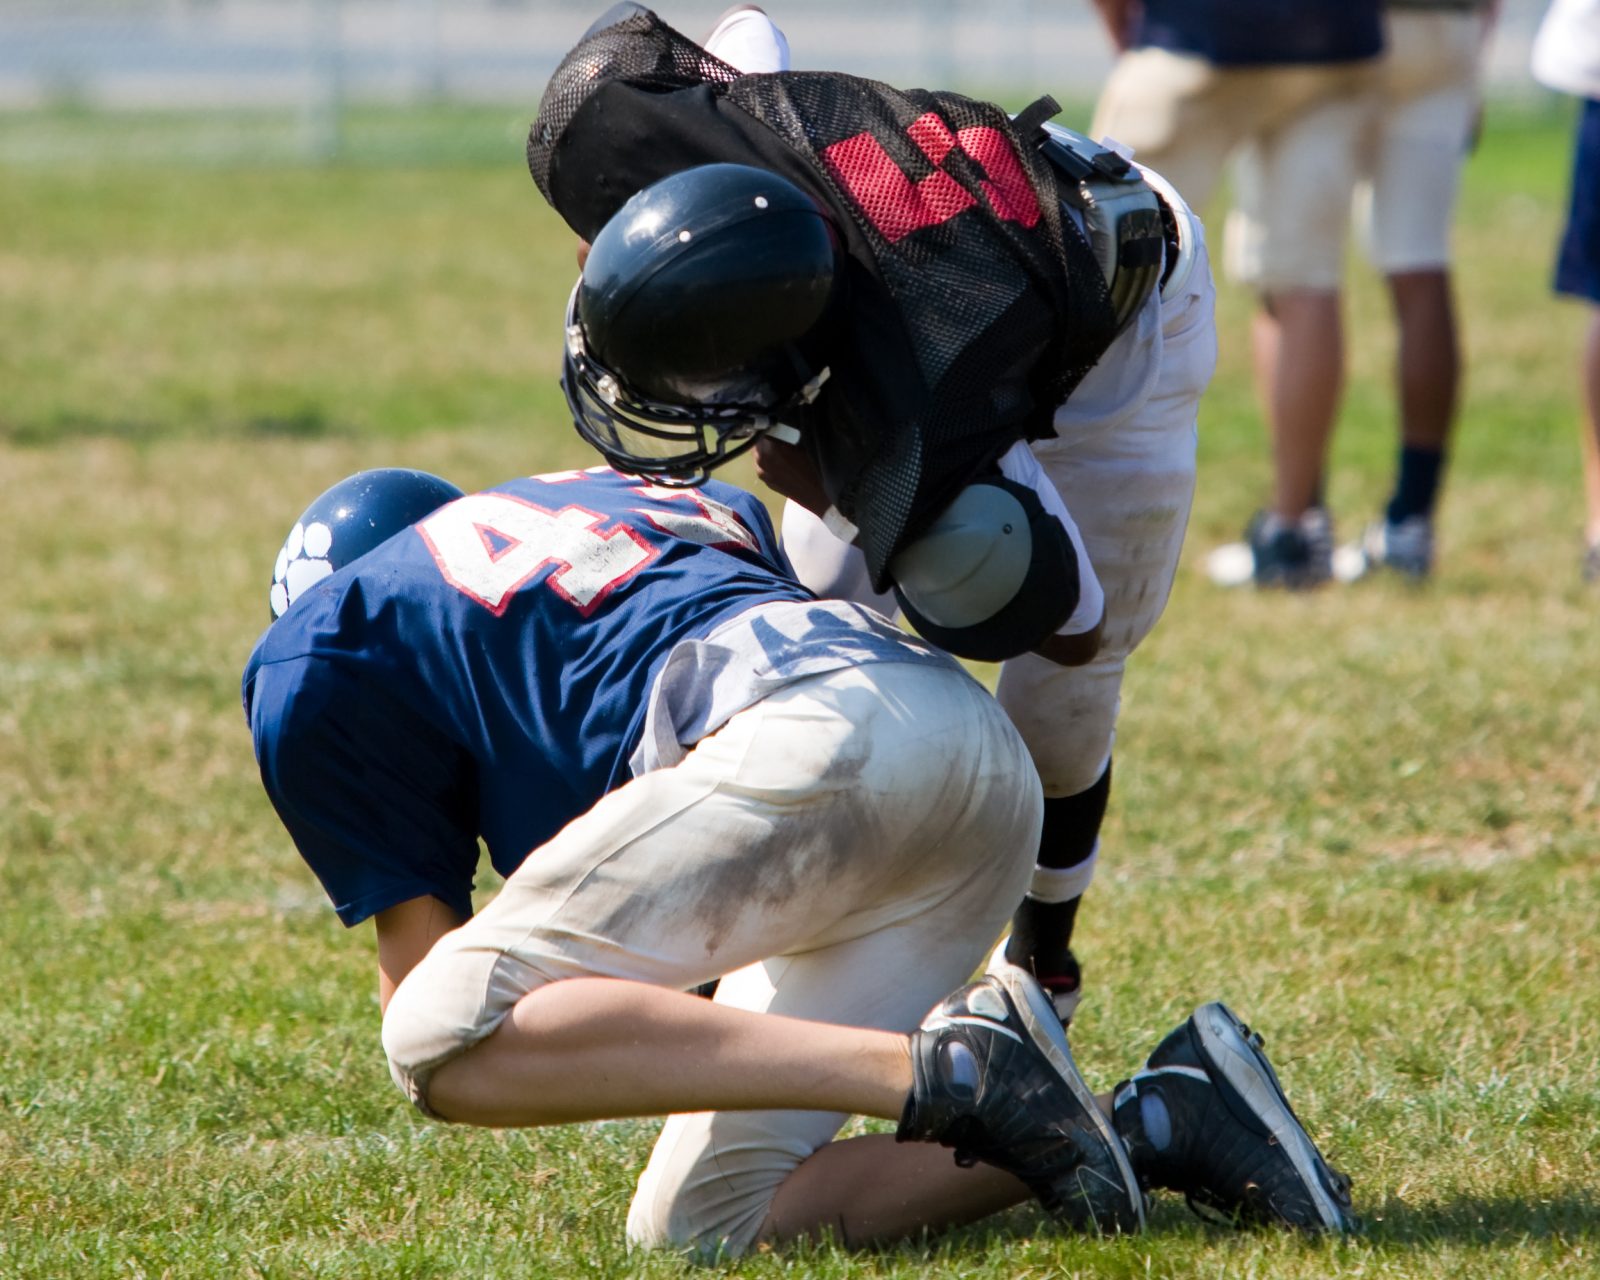 Concussions and Other Sports Related Injuries